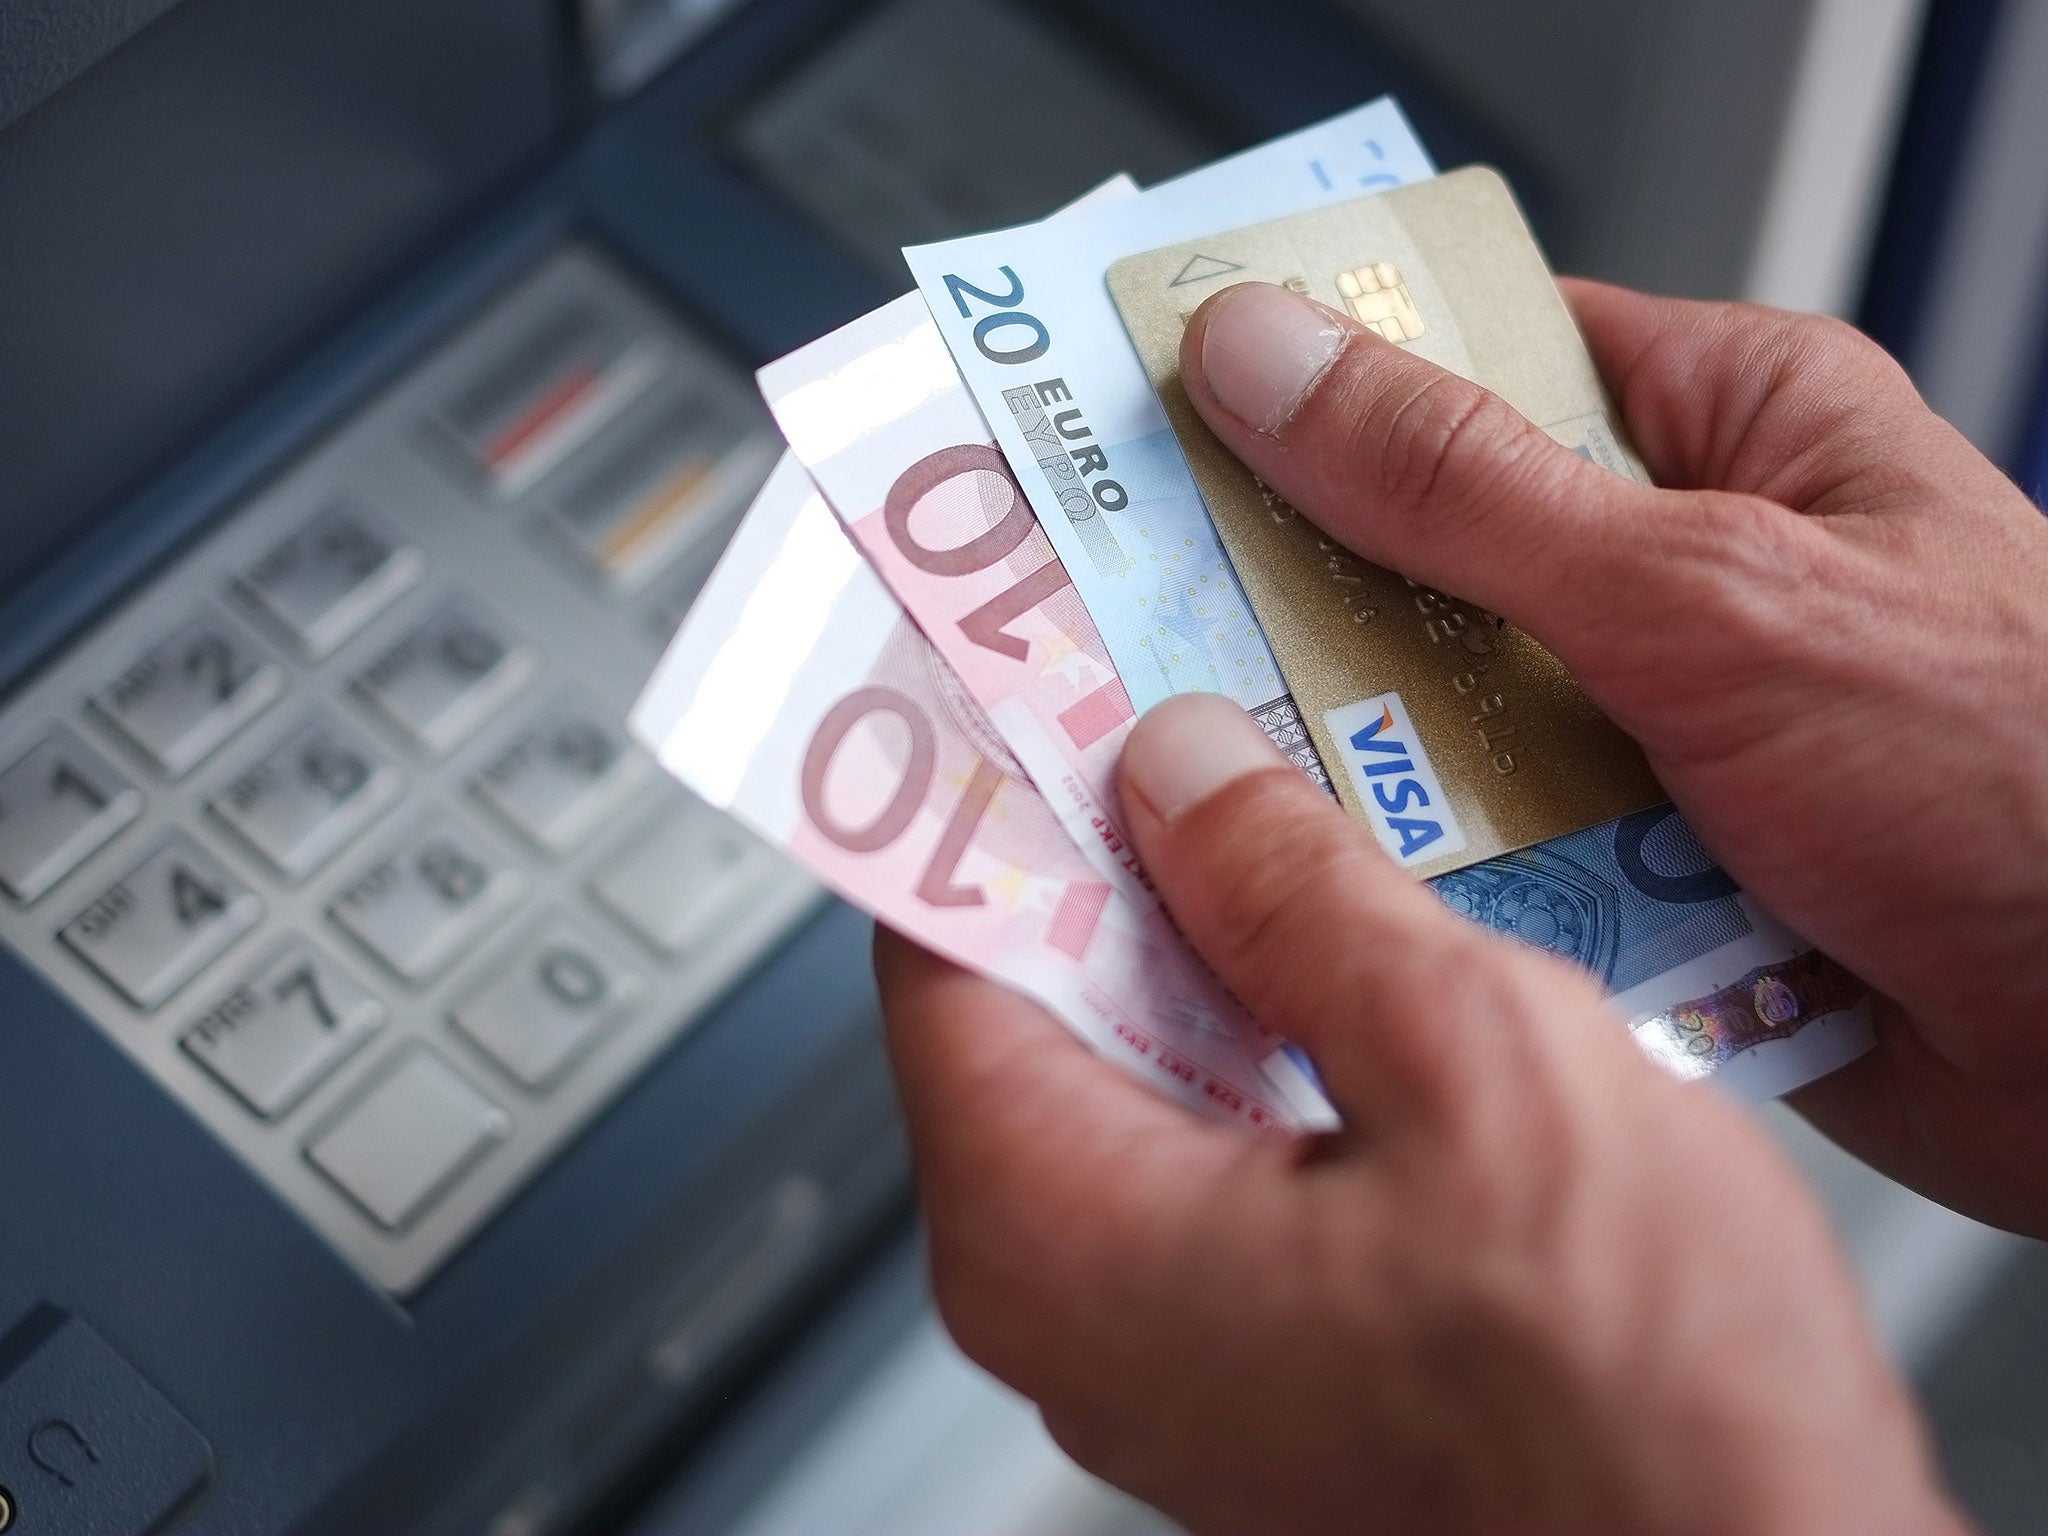 A man takes out Euro banknotes from an automated teller machine (ATM) at a cash point of the French bank 'La Banque Postale' in Carquefou, Western France.